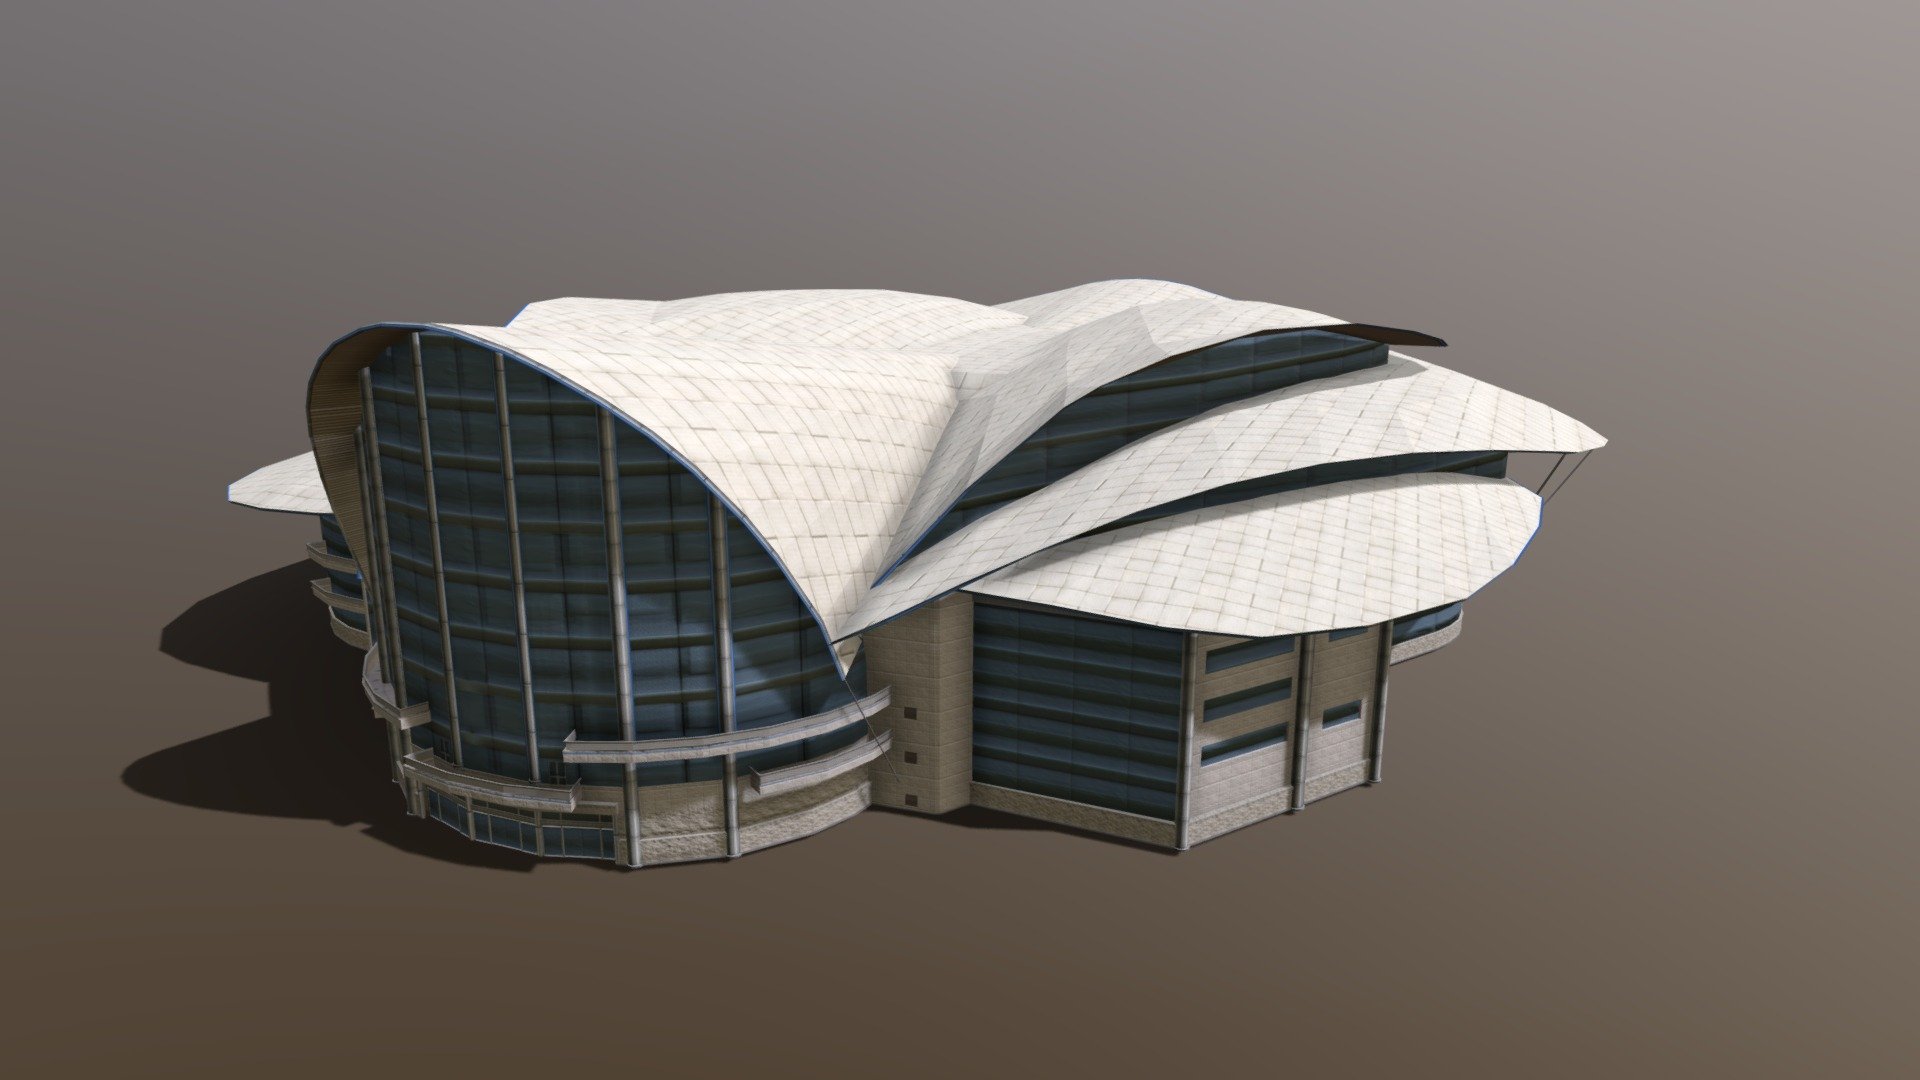 3D model of Hong Kong Convention and Exhibition Centre

With Albedo, Specular and Normal maps textures.

Low Poly - Game Ready.

Polygons 7062

Verts 16956 - Hong Kong Convention And Exhibition Centre - 3D model by leon017 3d model